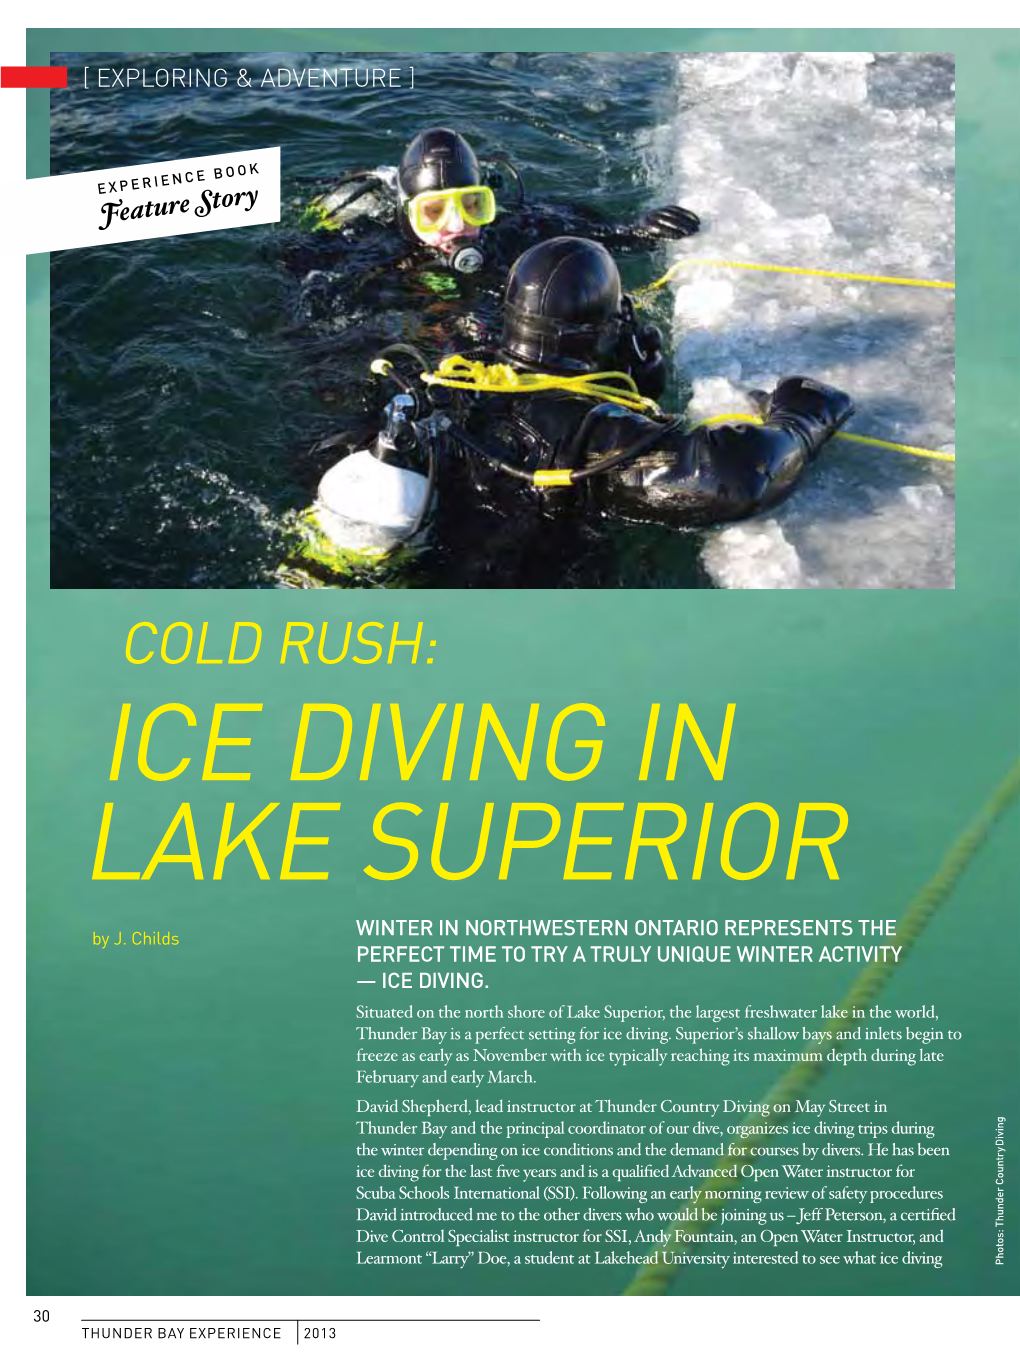 Ice Diving in Lake Superior